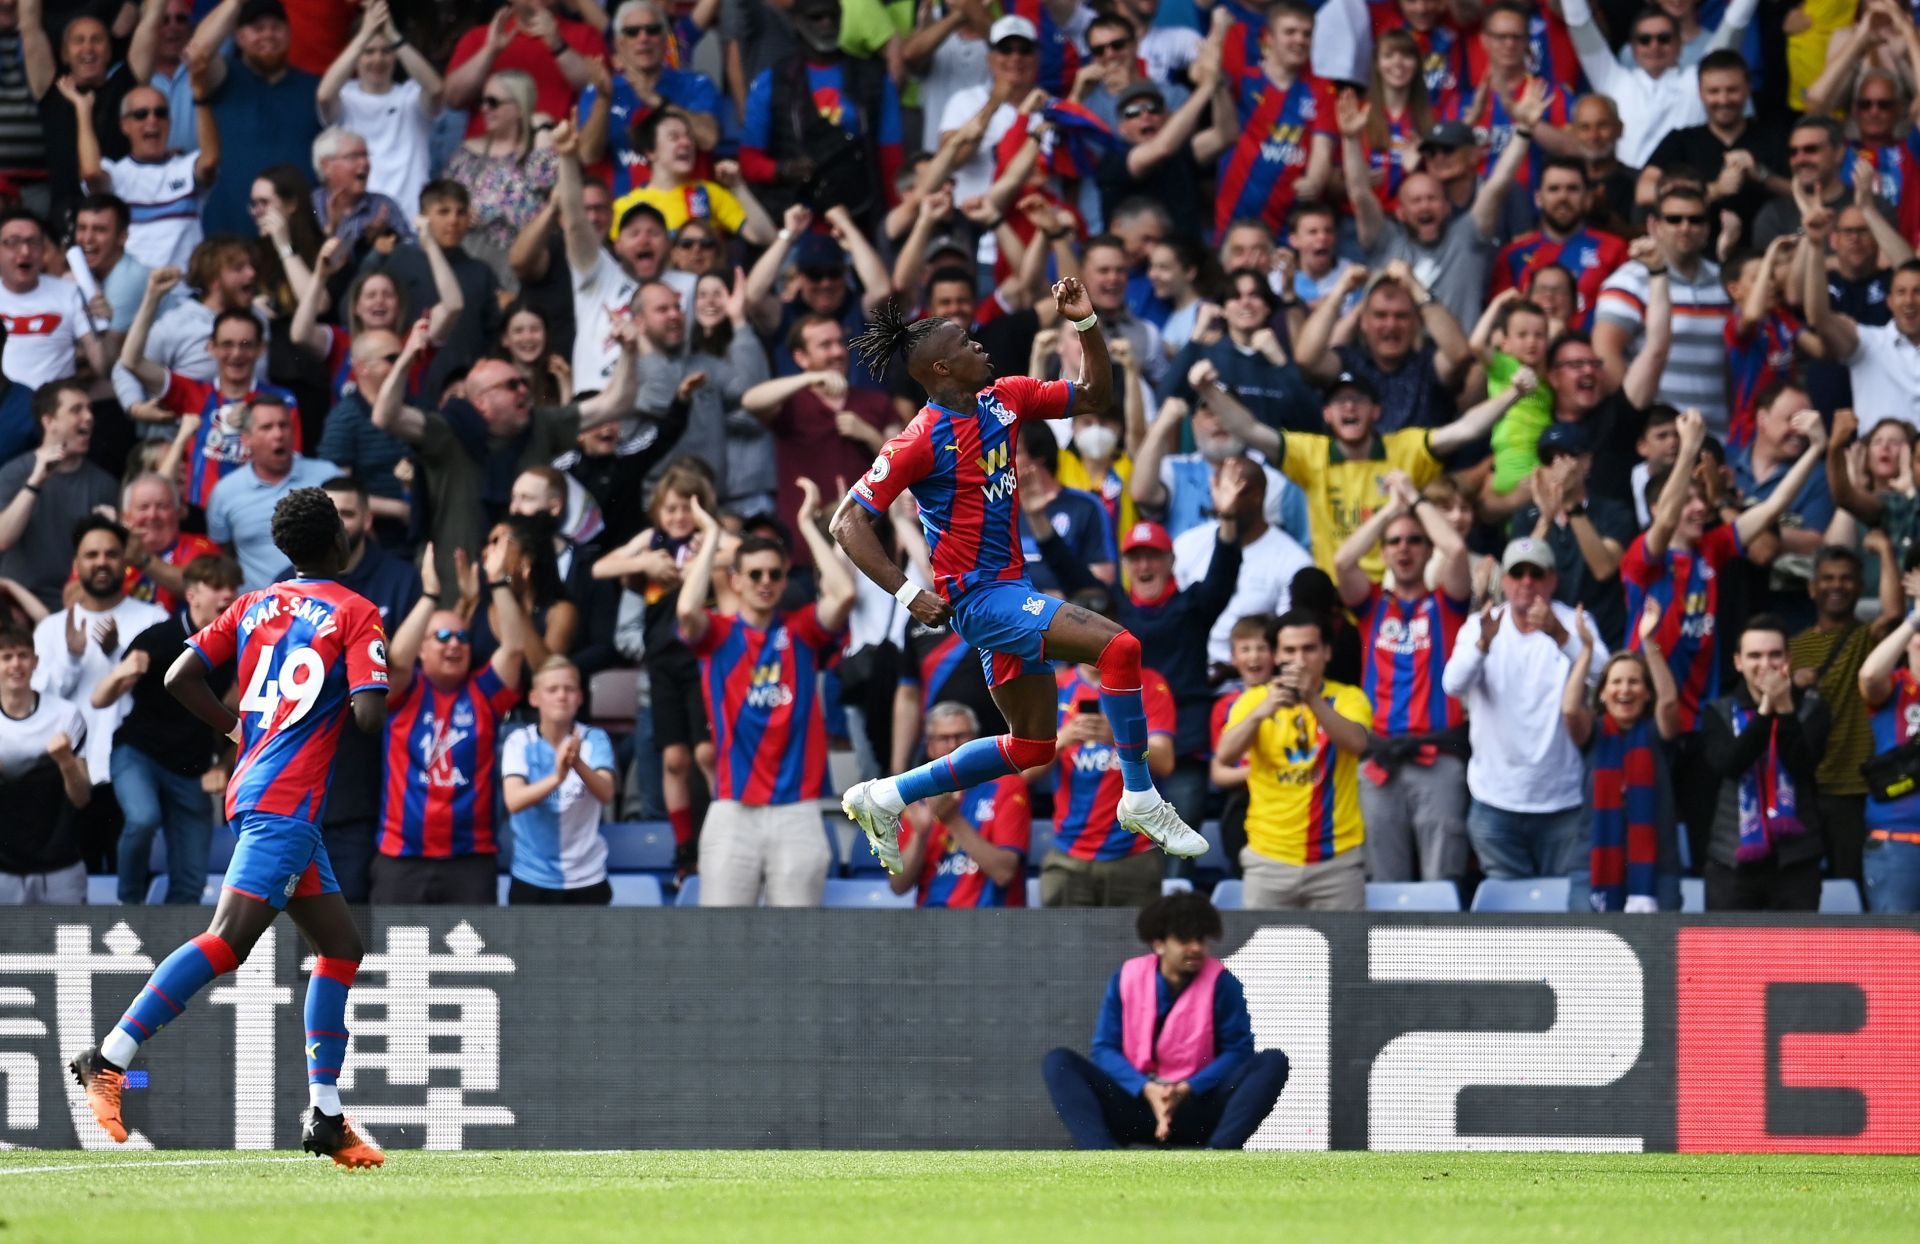 Wilfried Zaha&#039;s striker spurred Crystal Palace on to a 1-0 win over Manchester United